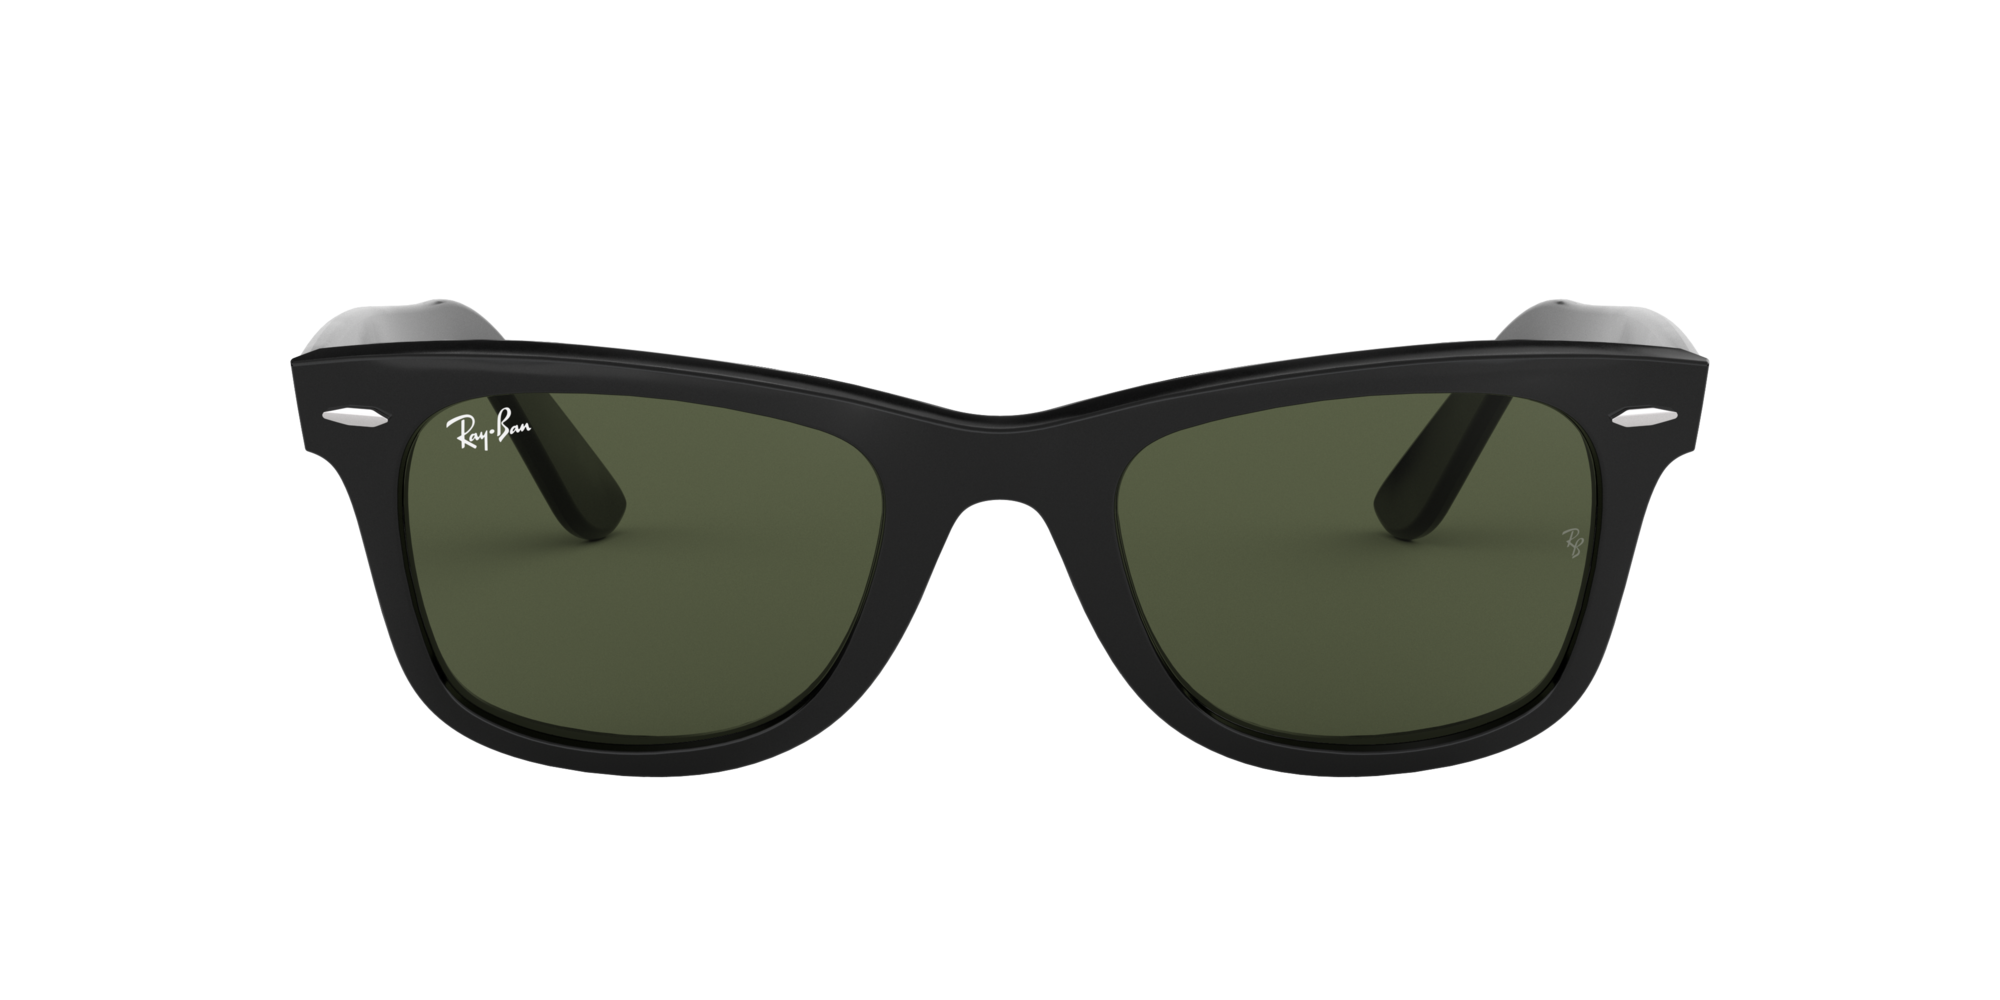 Ray-Ban 0RB2140 in Black Sunglasses | OPSM